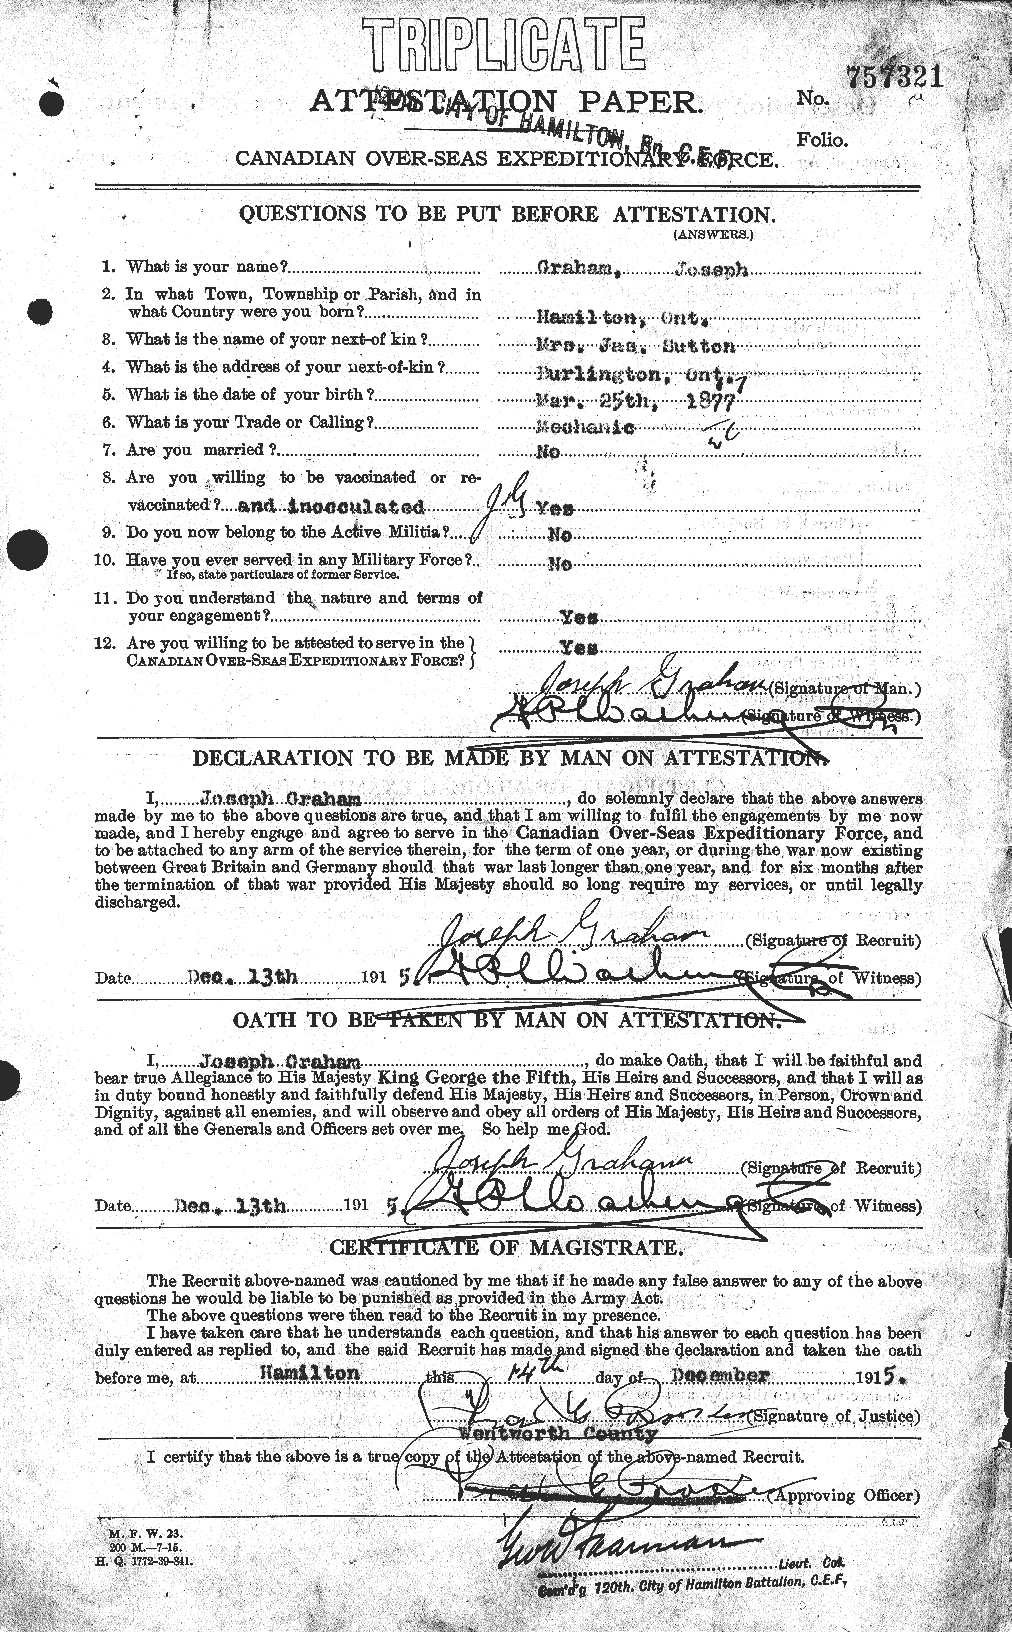 Personnel Records of the First World War - CEF 359235a